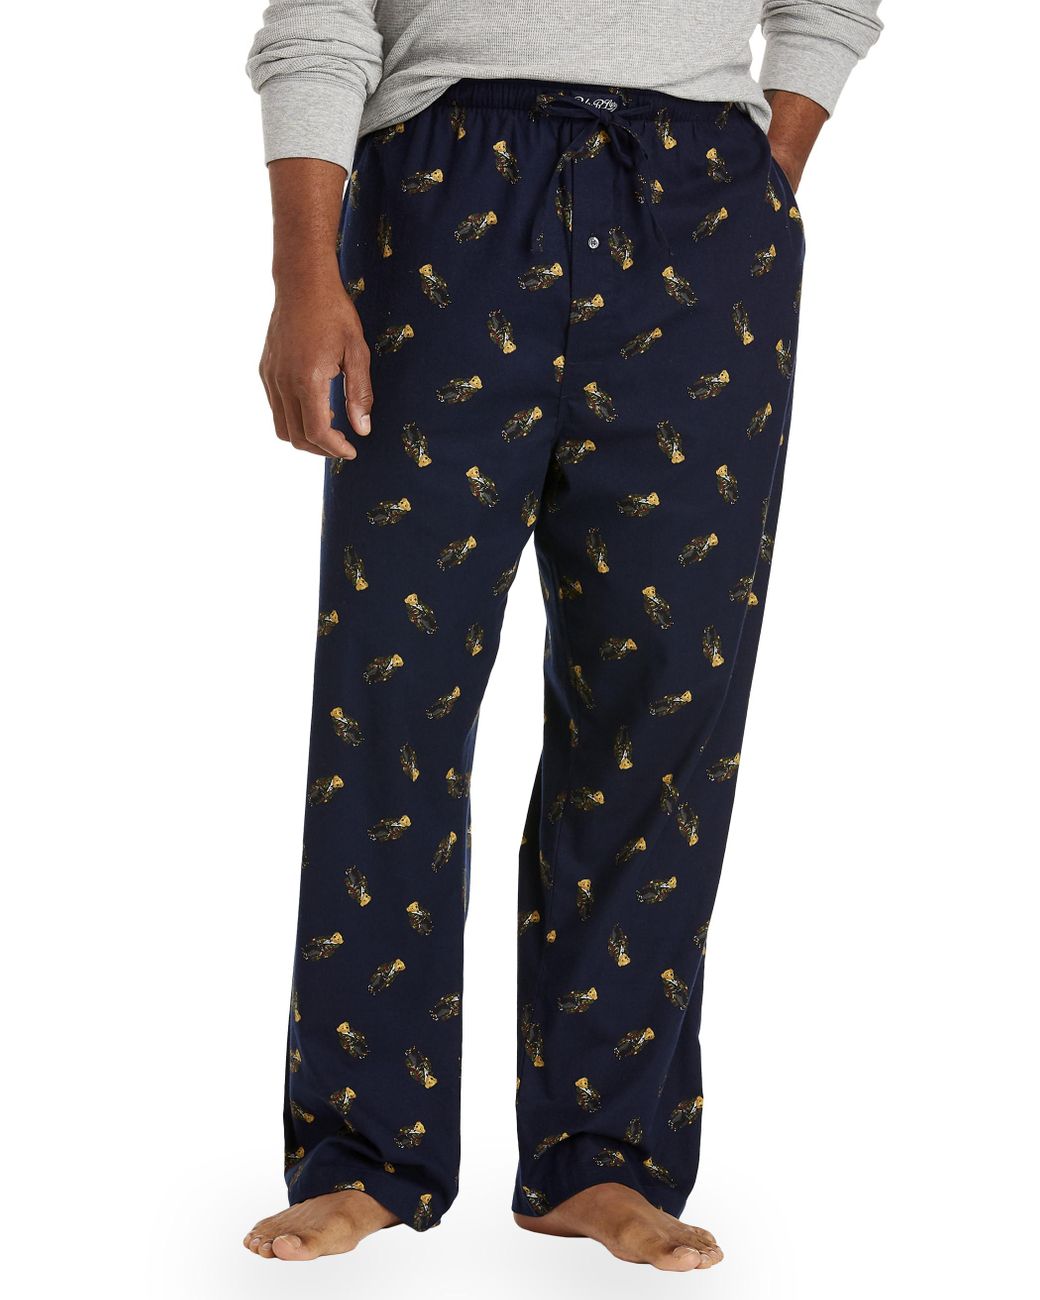 Polo Ralph Lauren Big & Tall Polo Bear Flannel Lounge Pants in Navy (Blue) for Men - Lyst